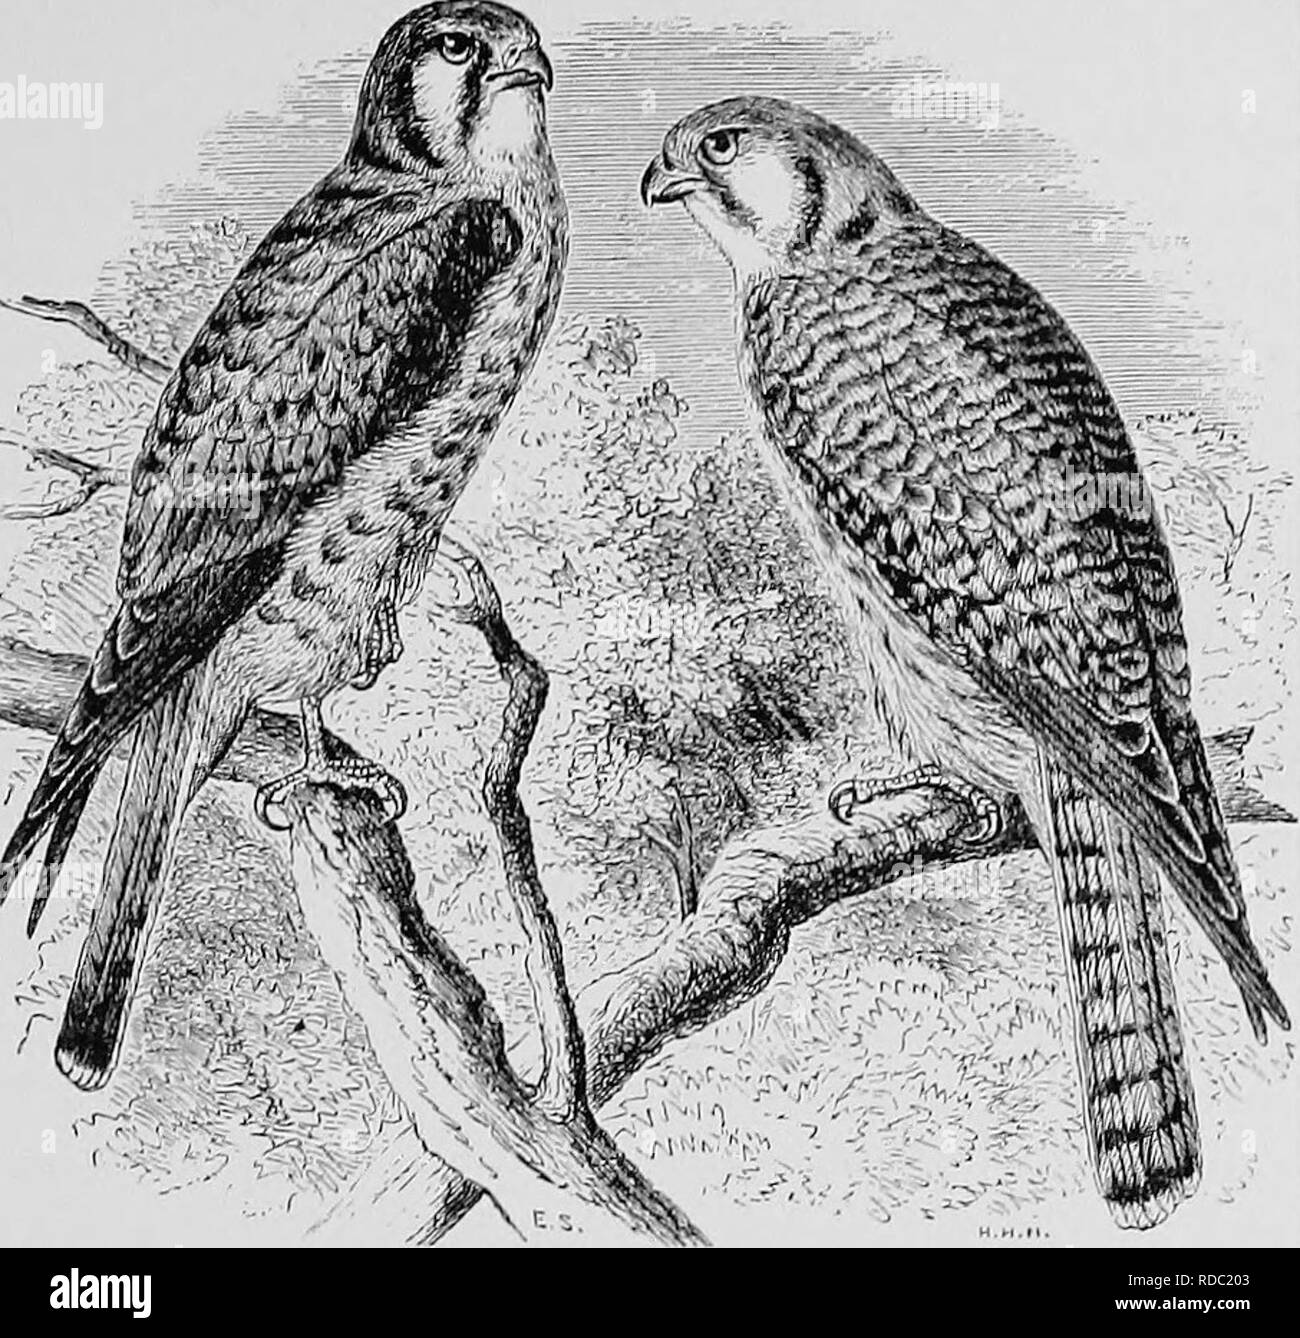 . A popular handbook of the ornithology of the United States and Canada, based on Nuttall's Manual. Birds; Birds. AMERICAN SPARROW HAWK. Falco sparverius. Char. Adult male : head bluish ash, with reddish patch on crown, and black patch on sides and nape ; back rufous ; wings bluish and black in bars ; tail tawny, with black band, and tipped with white; below, buffish or tawny. Female : rufous and black, more streaked than the male; the tail tawny, with several blackish bars. Length lo to ii inches. Nest. Usually in cavities of trees, often in Woodpecker's holes, some- times in deserted nest of Stock Photo